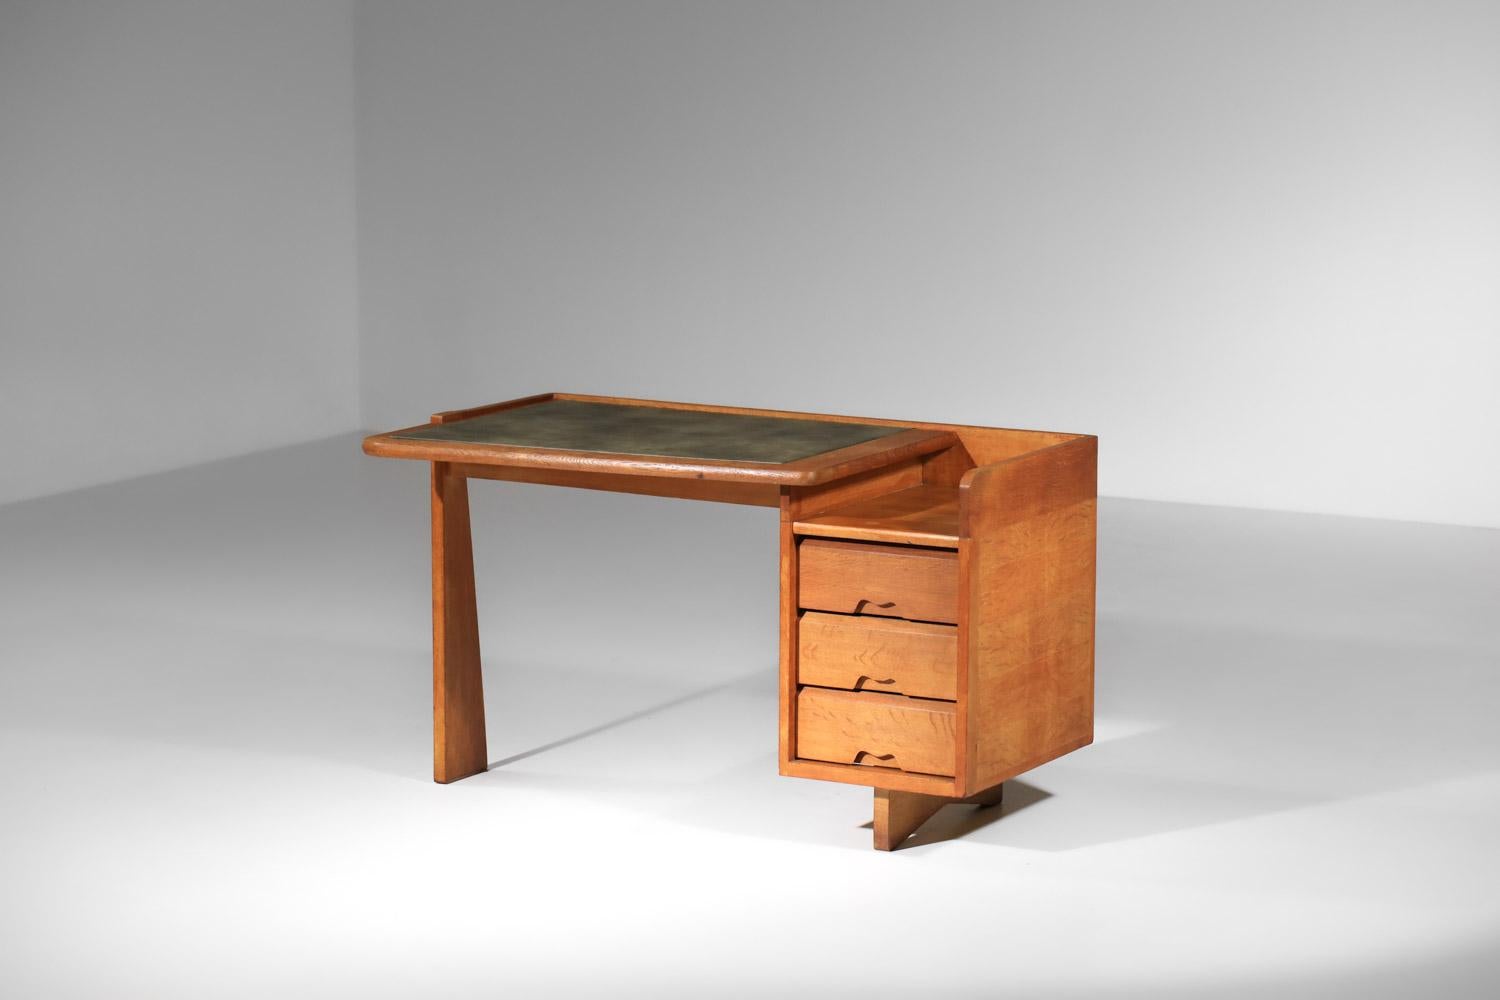 Modernist 60's desk by the famous French design duo Guillerme & Chambron for Votre Maison. This solid oak desk features a column of three drawers and a top covered with a khaki leather underside (refurbished and patinated). Sober, elegant design